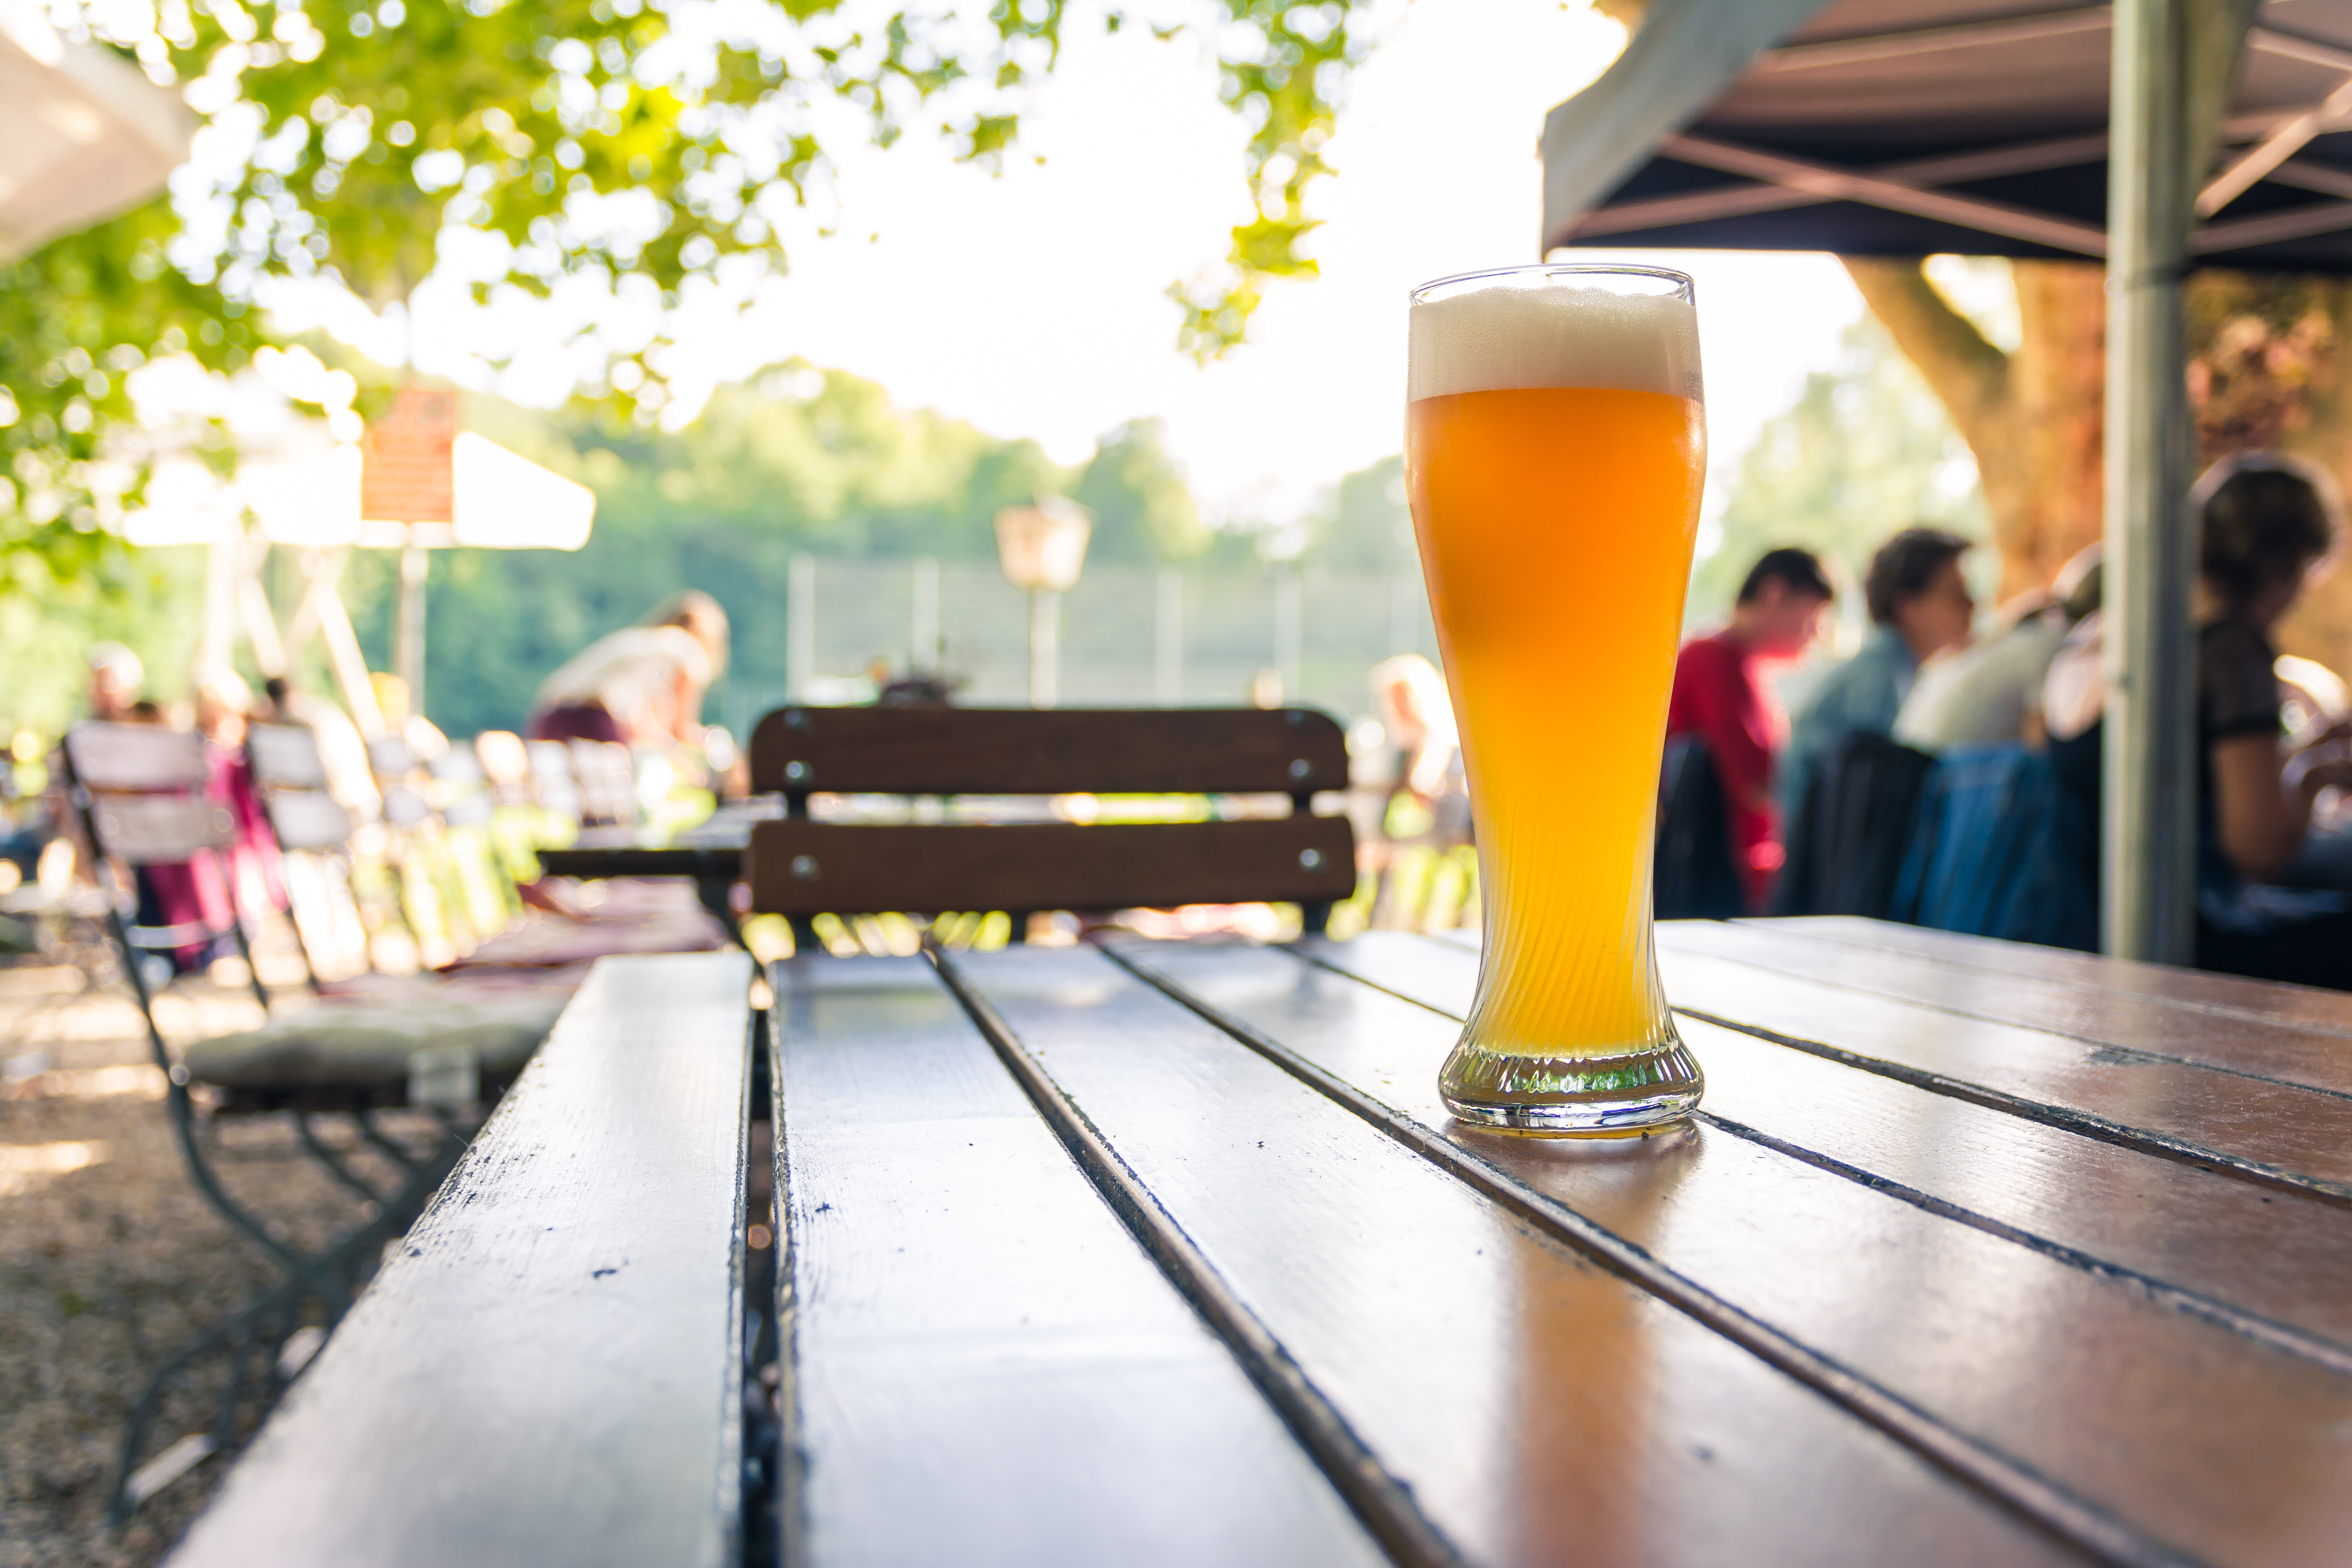 A stock photograph of a glass of beer on an outdoor table in a beer garden